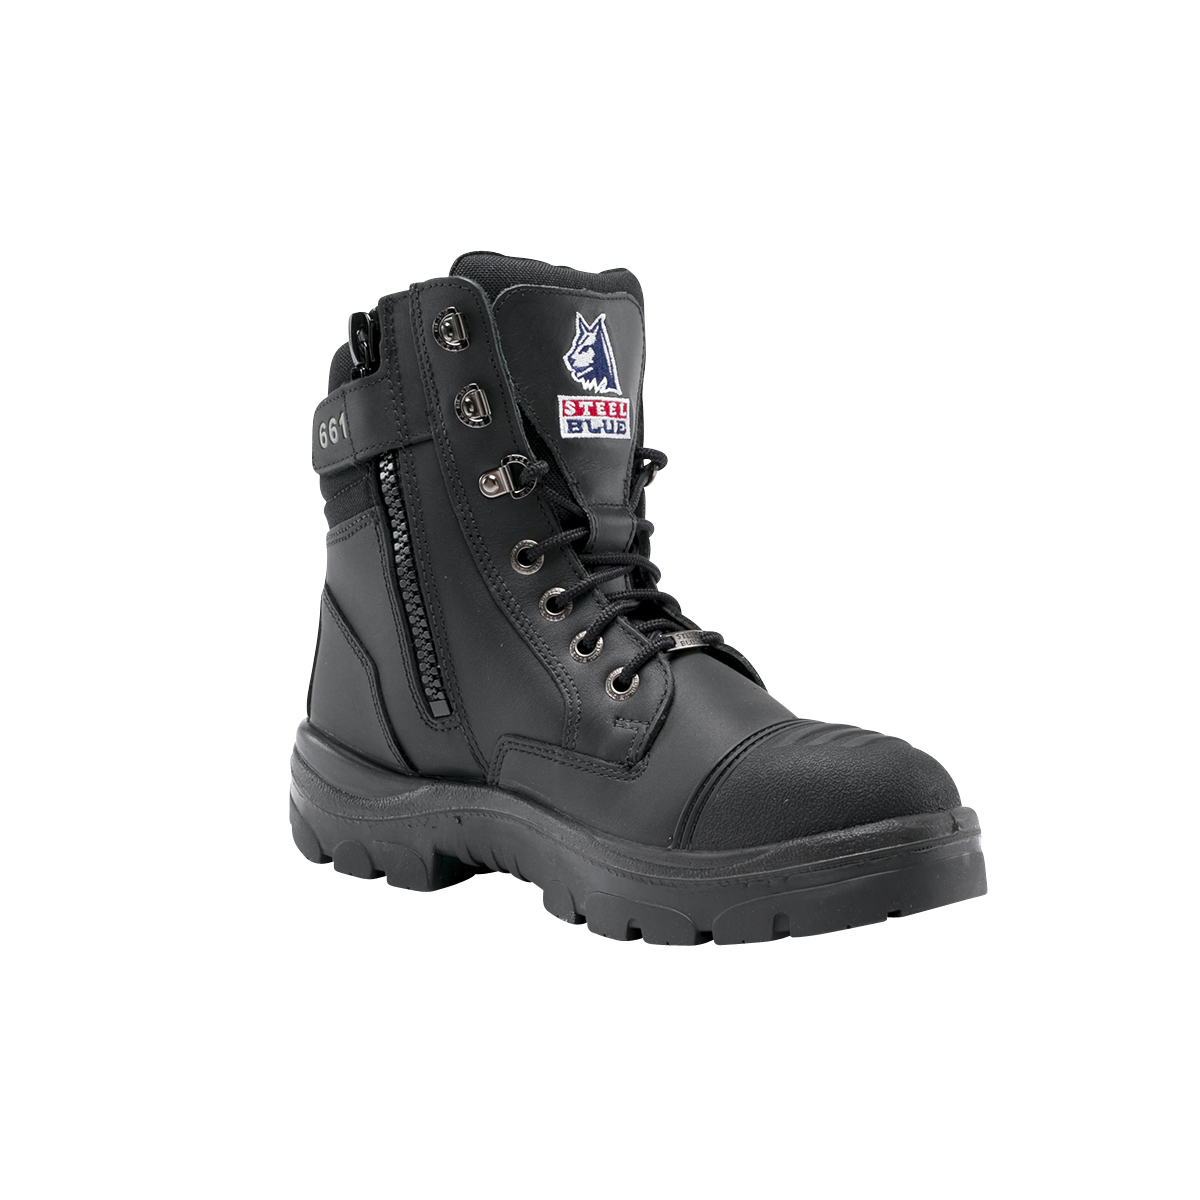 SAFETY BOOT SOUTHERN X BLACK S10 - ZIP SIDE SCUFF CAP